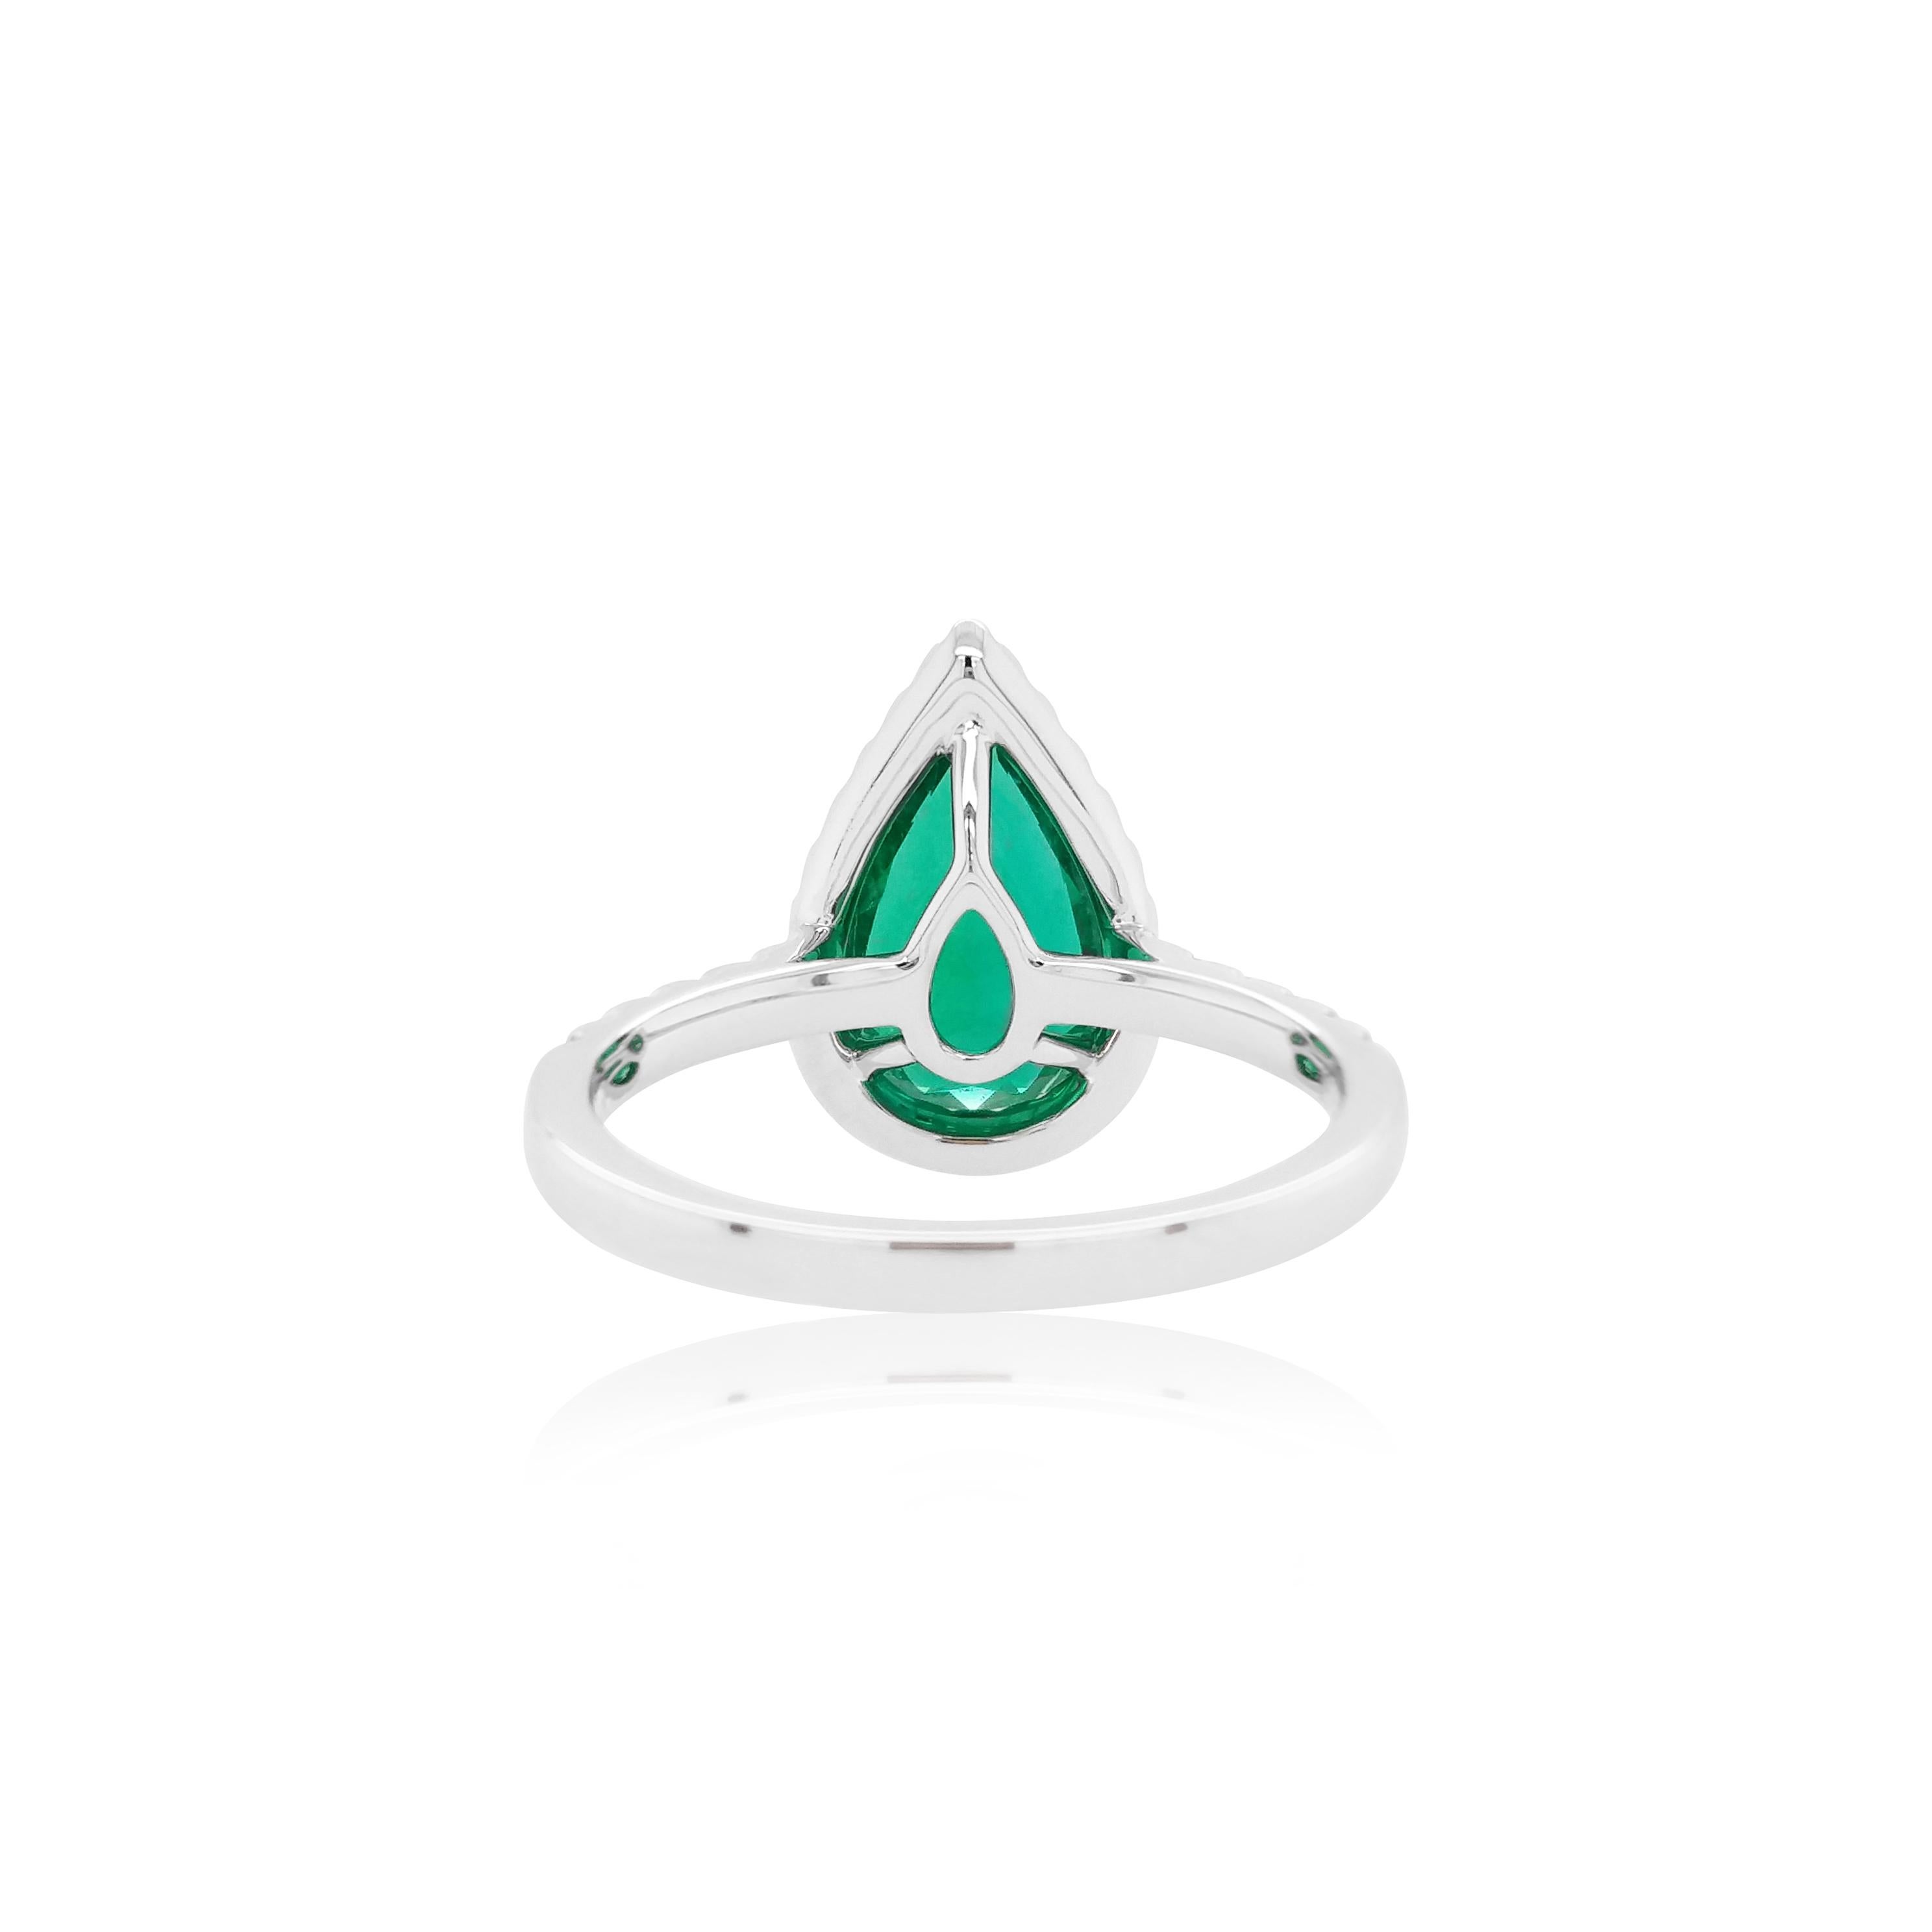 This elegant ring features a lustrous vivid green Pear-shape Colombian Emerald at its centre, with a delicate diamond halo surrounding it. Set in 18 Karat white gold to enrich the spectacular hues of the emerald and the sparkle of the diamonds, this